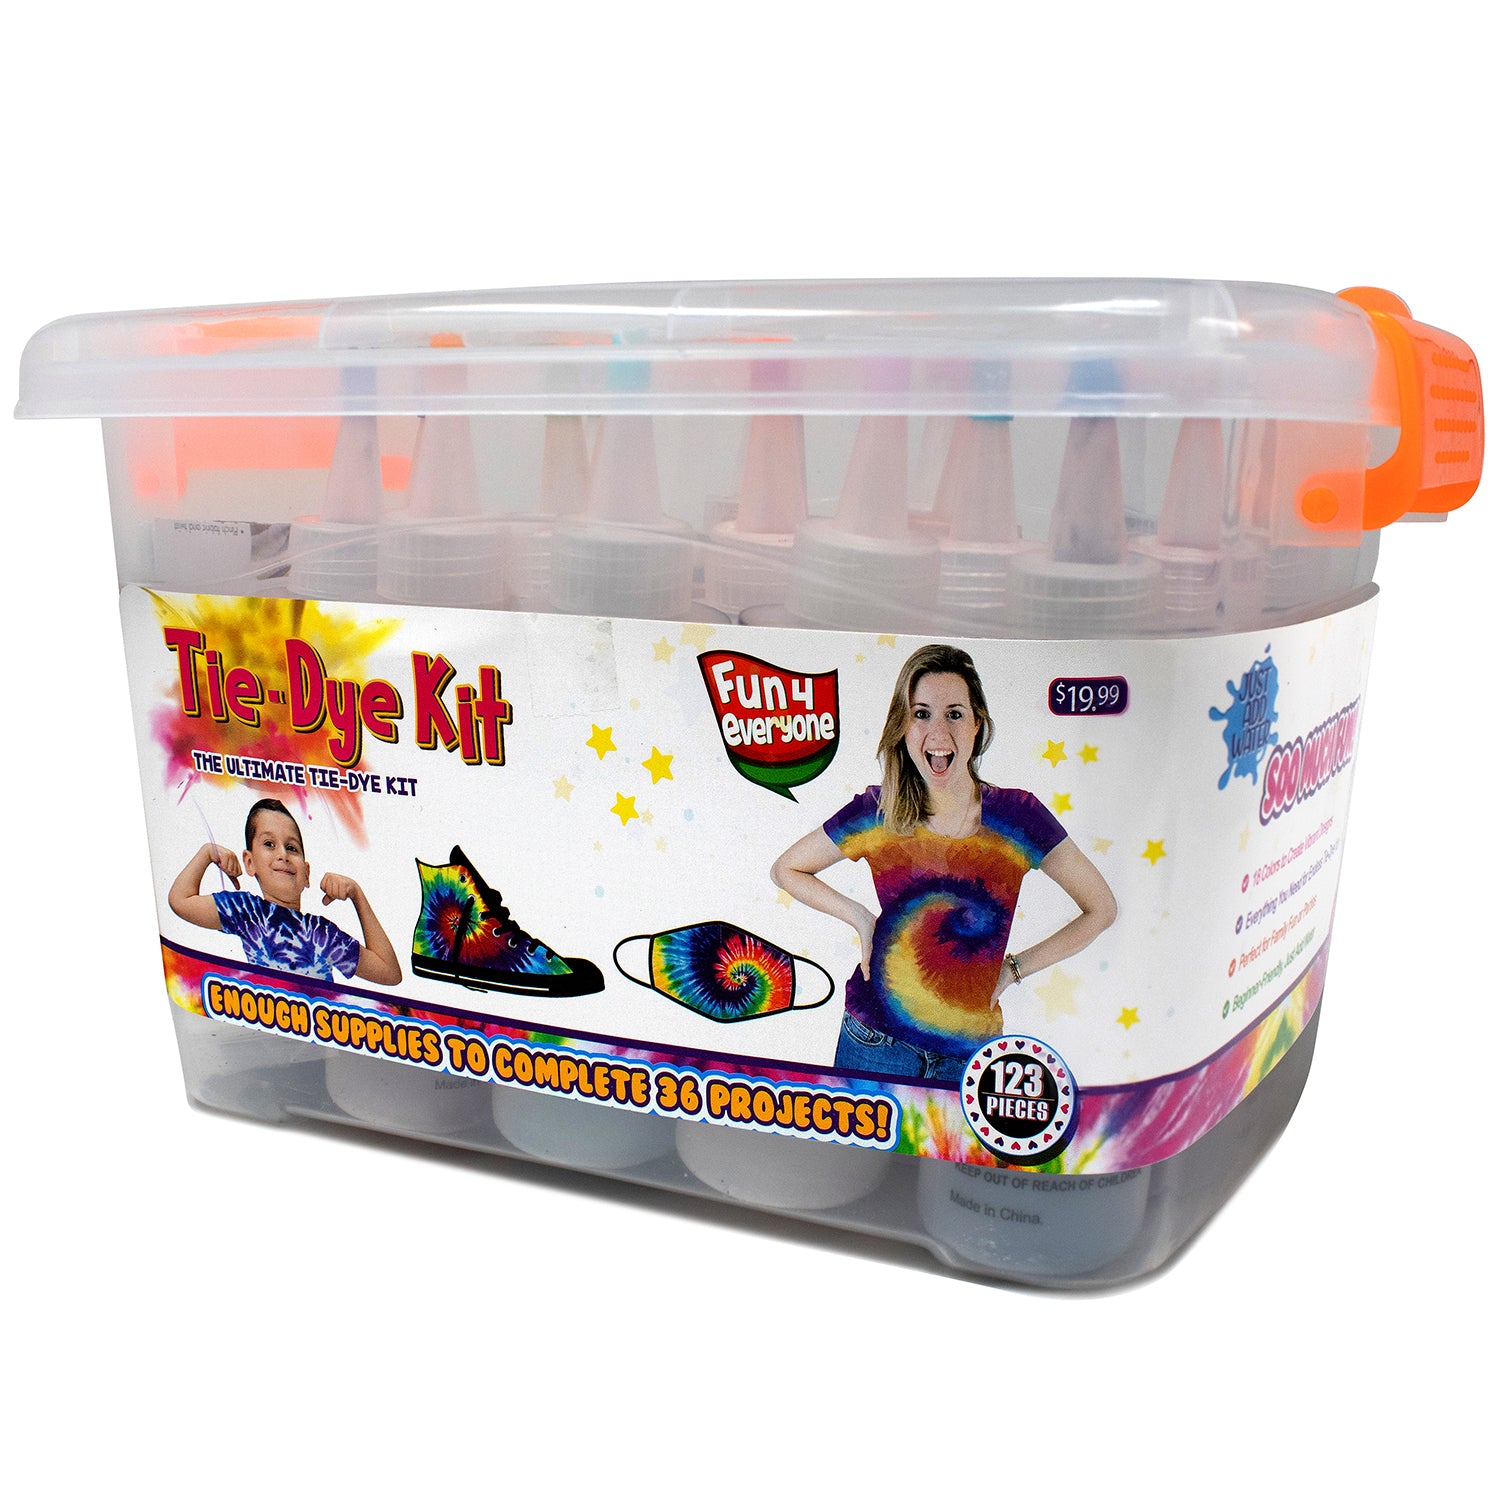 Ultimate Tie Dye Kit. Kids will create wearable art and unique designs. Students in second grade and up can practice their skills as they discover the science behind the art of tie-dying. This DIY kit includes project ideas and tie-dying supplies. 18 squeeze bottles containing dye, 12 protective gloves, 90 rubber bands, 1 carry case, reusable surface cover and instruction guide. 